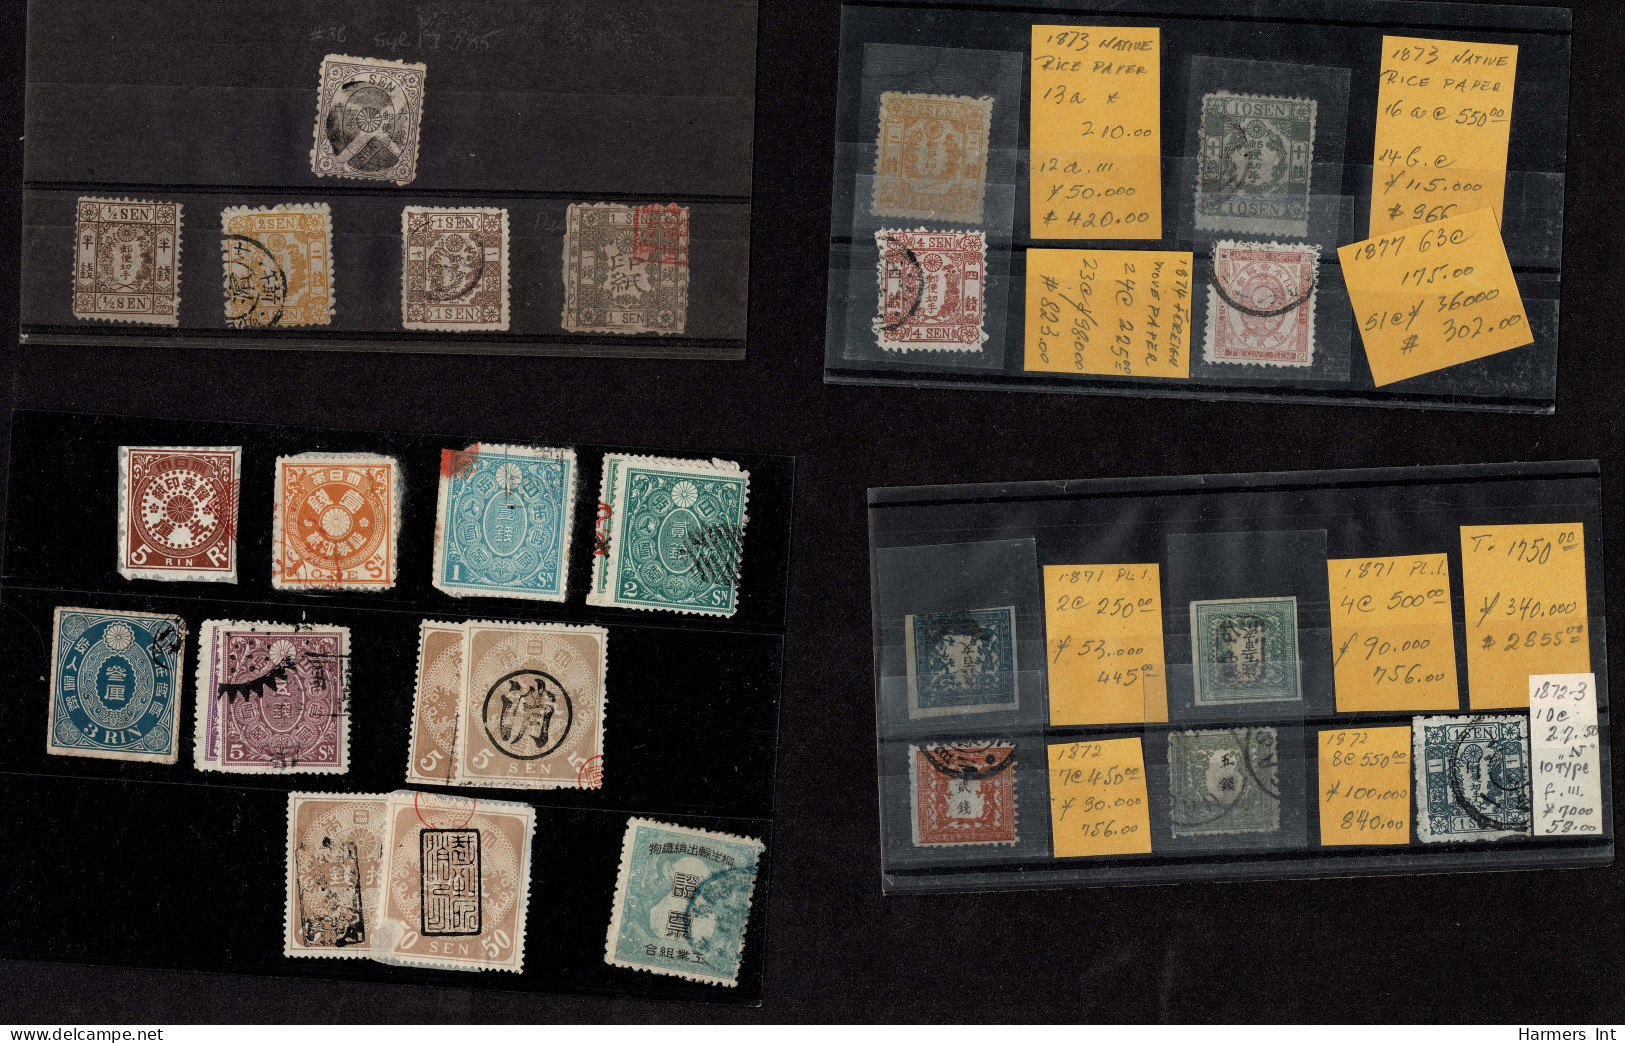 Lot # 348 Japan 1871 to 1888 collection of 68 stamps